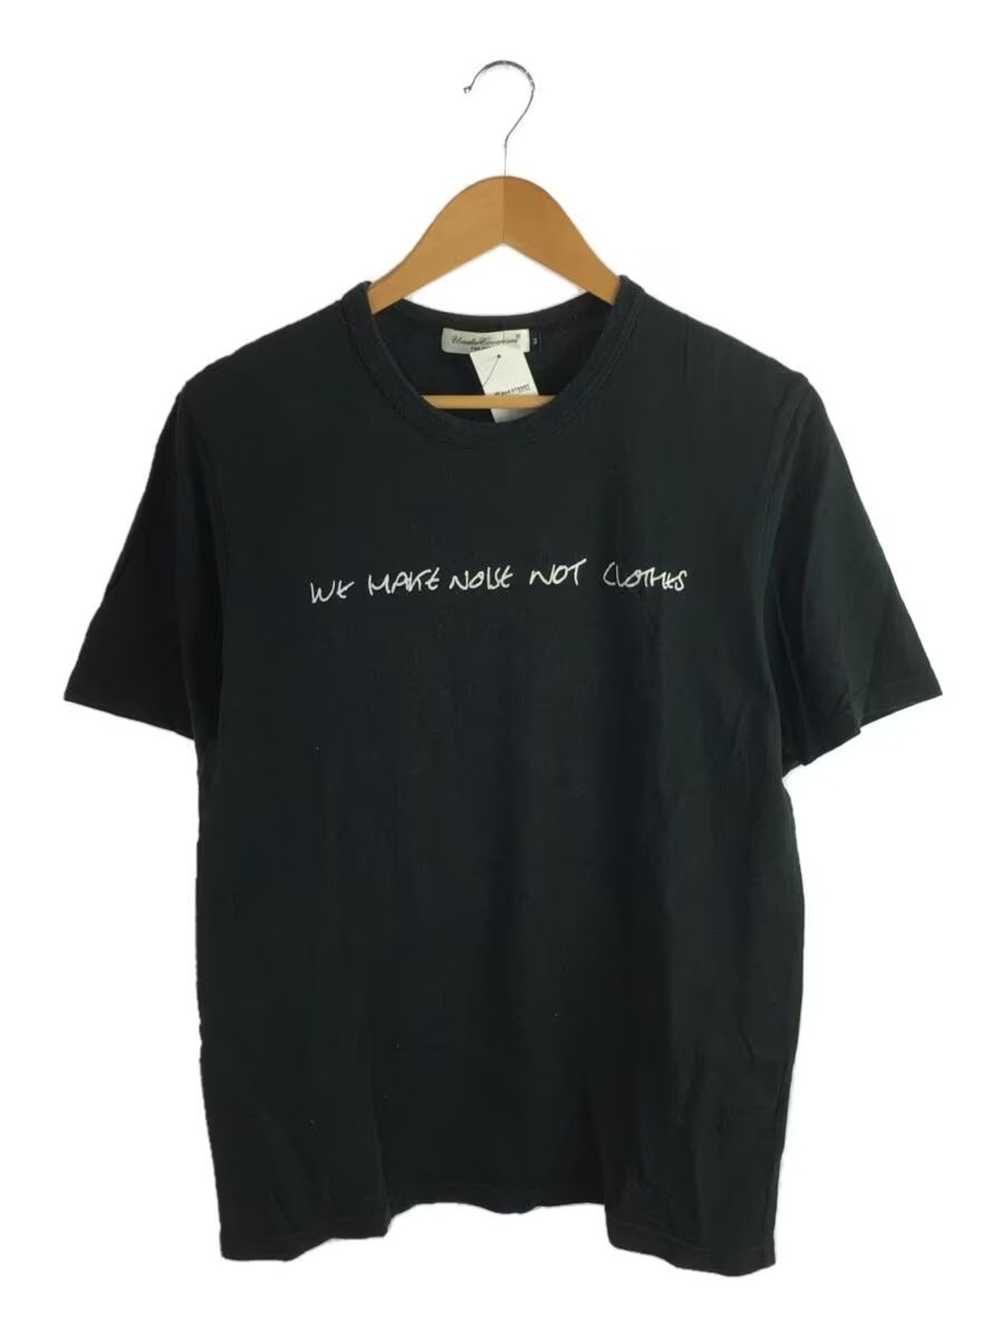 Undercover "We Make Noise Not Clothes" Sketch tee - image 1